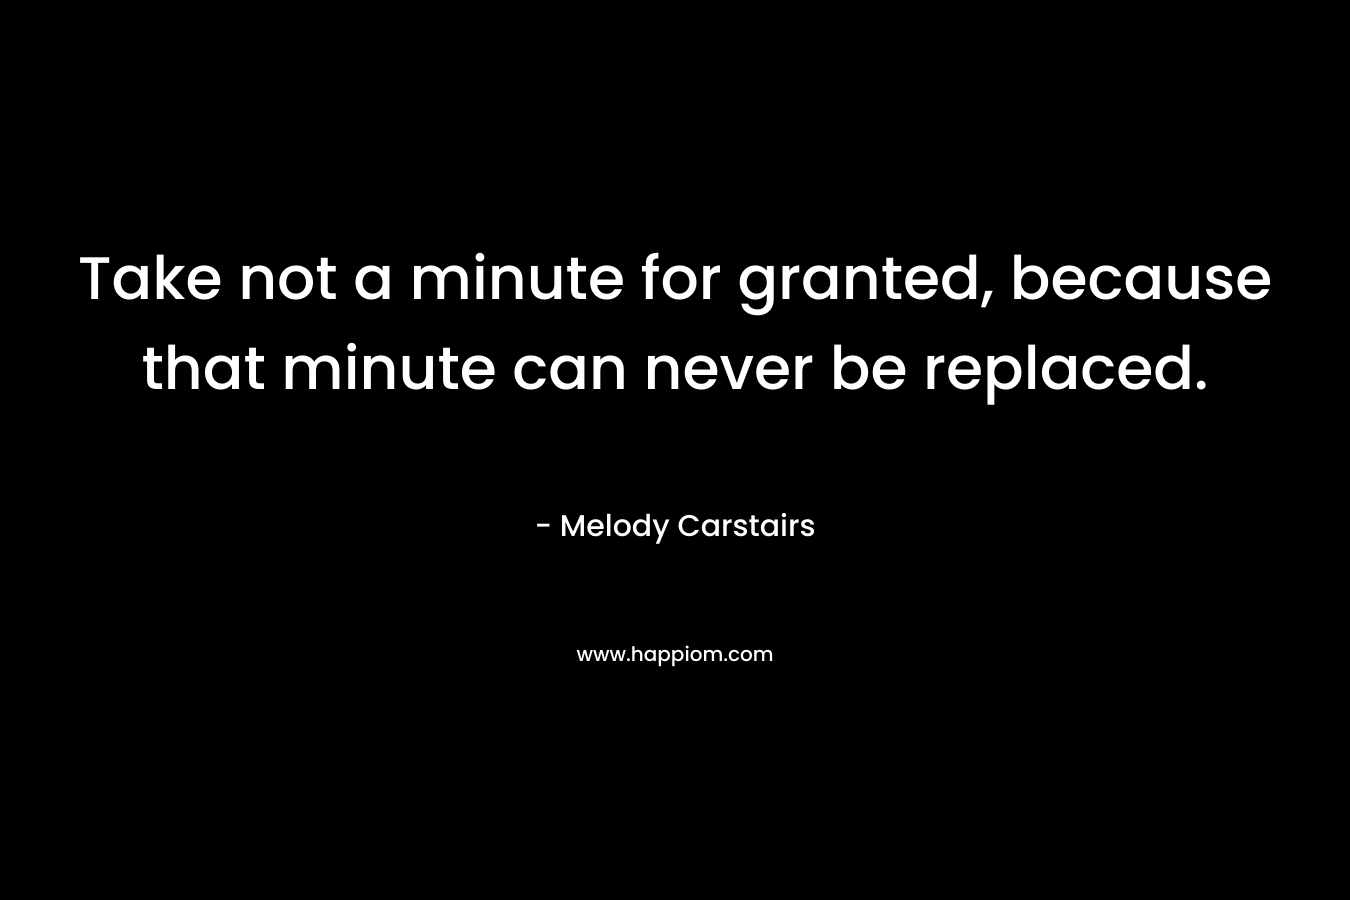 Take not a minute for granted, because that minute can never be replaced.